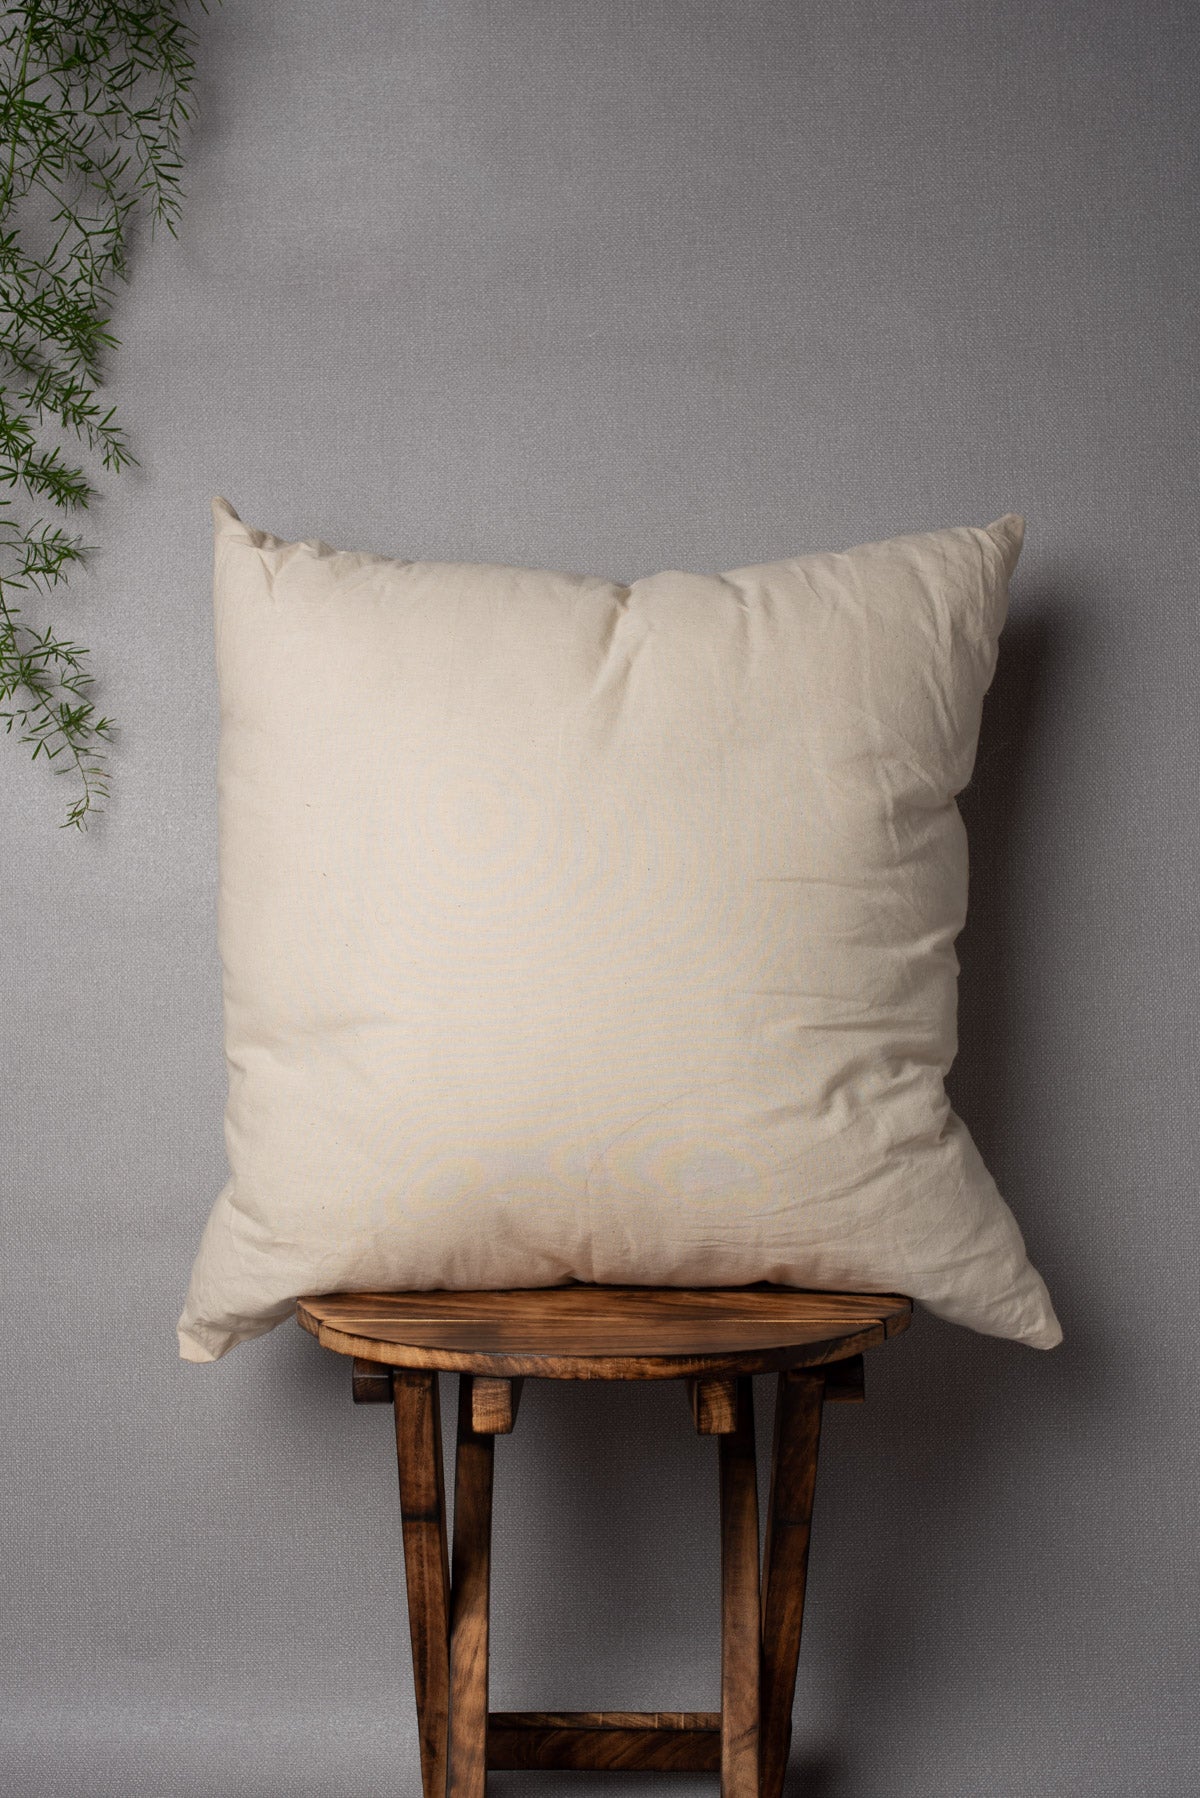 What's the Best Filling for Cushions? –